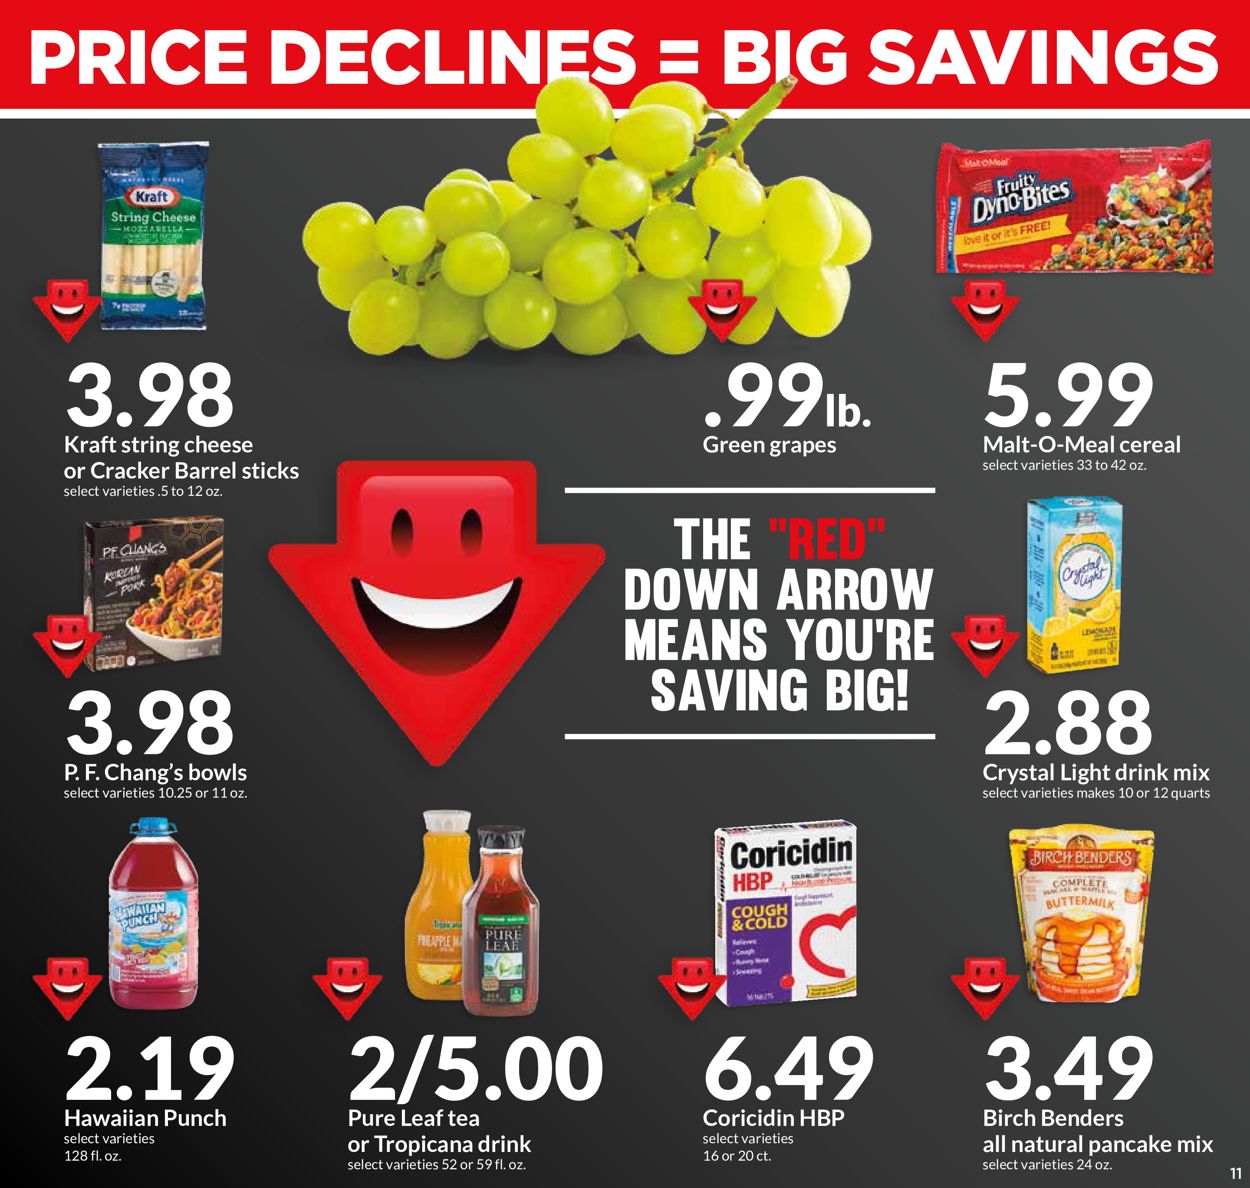 HyVee Current weekly ad 11/13 11/19/2019 [11] frequent